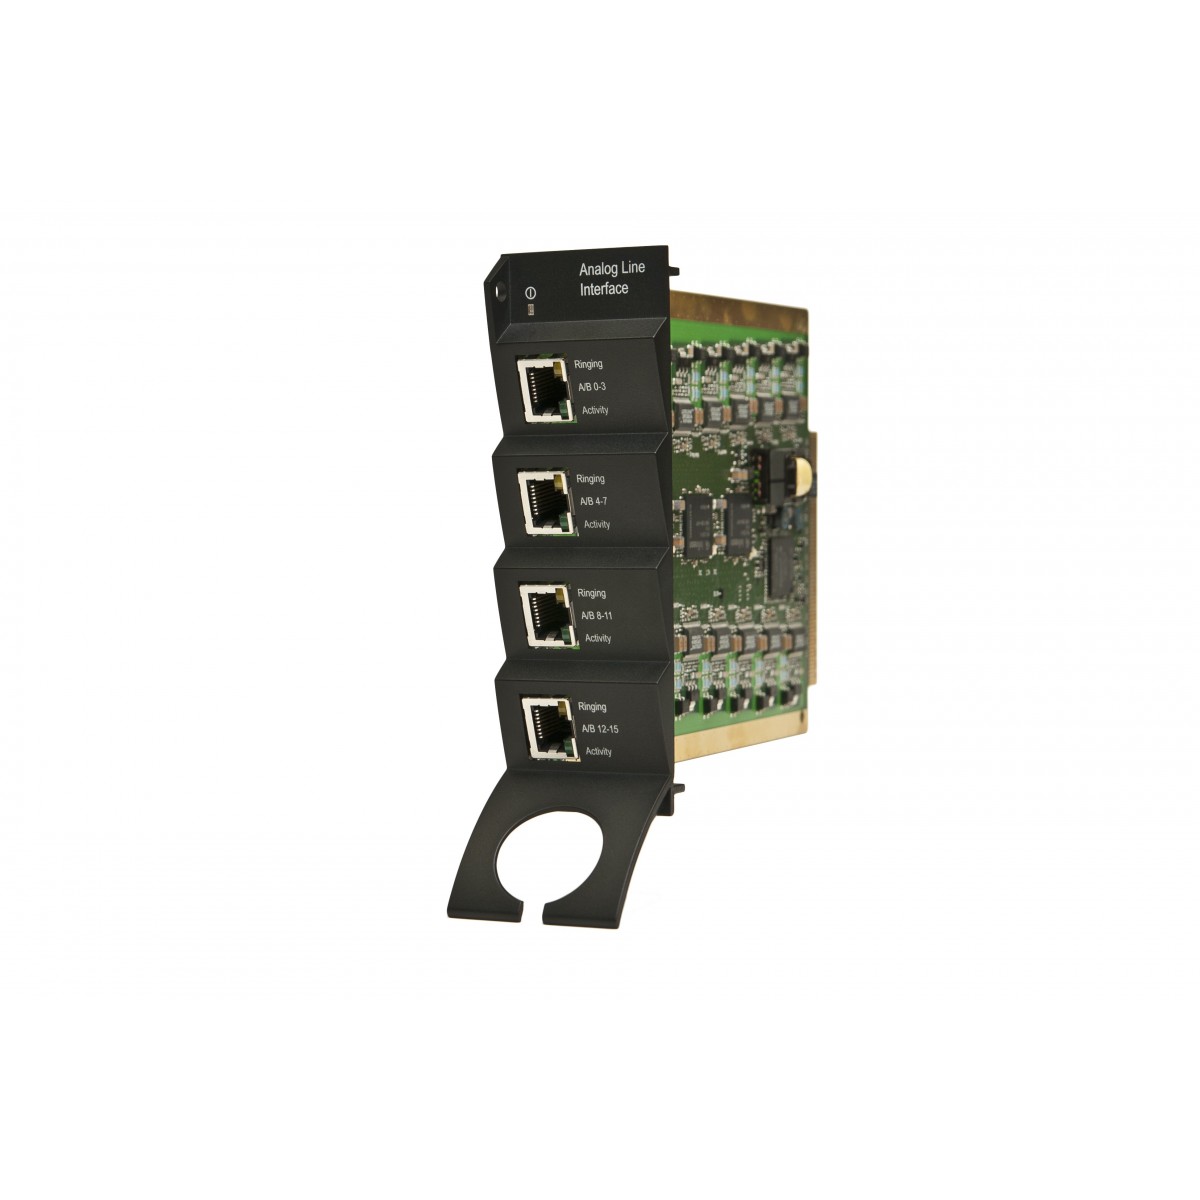 Poly Analog card 16 lines for KWS 2500-8000